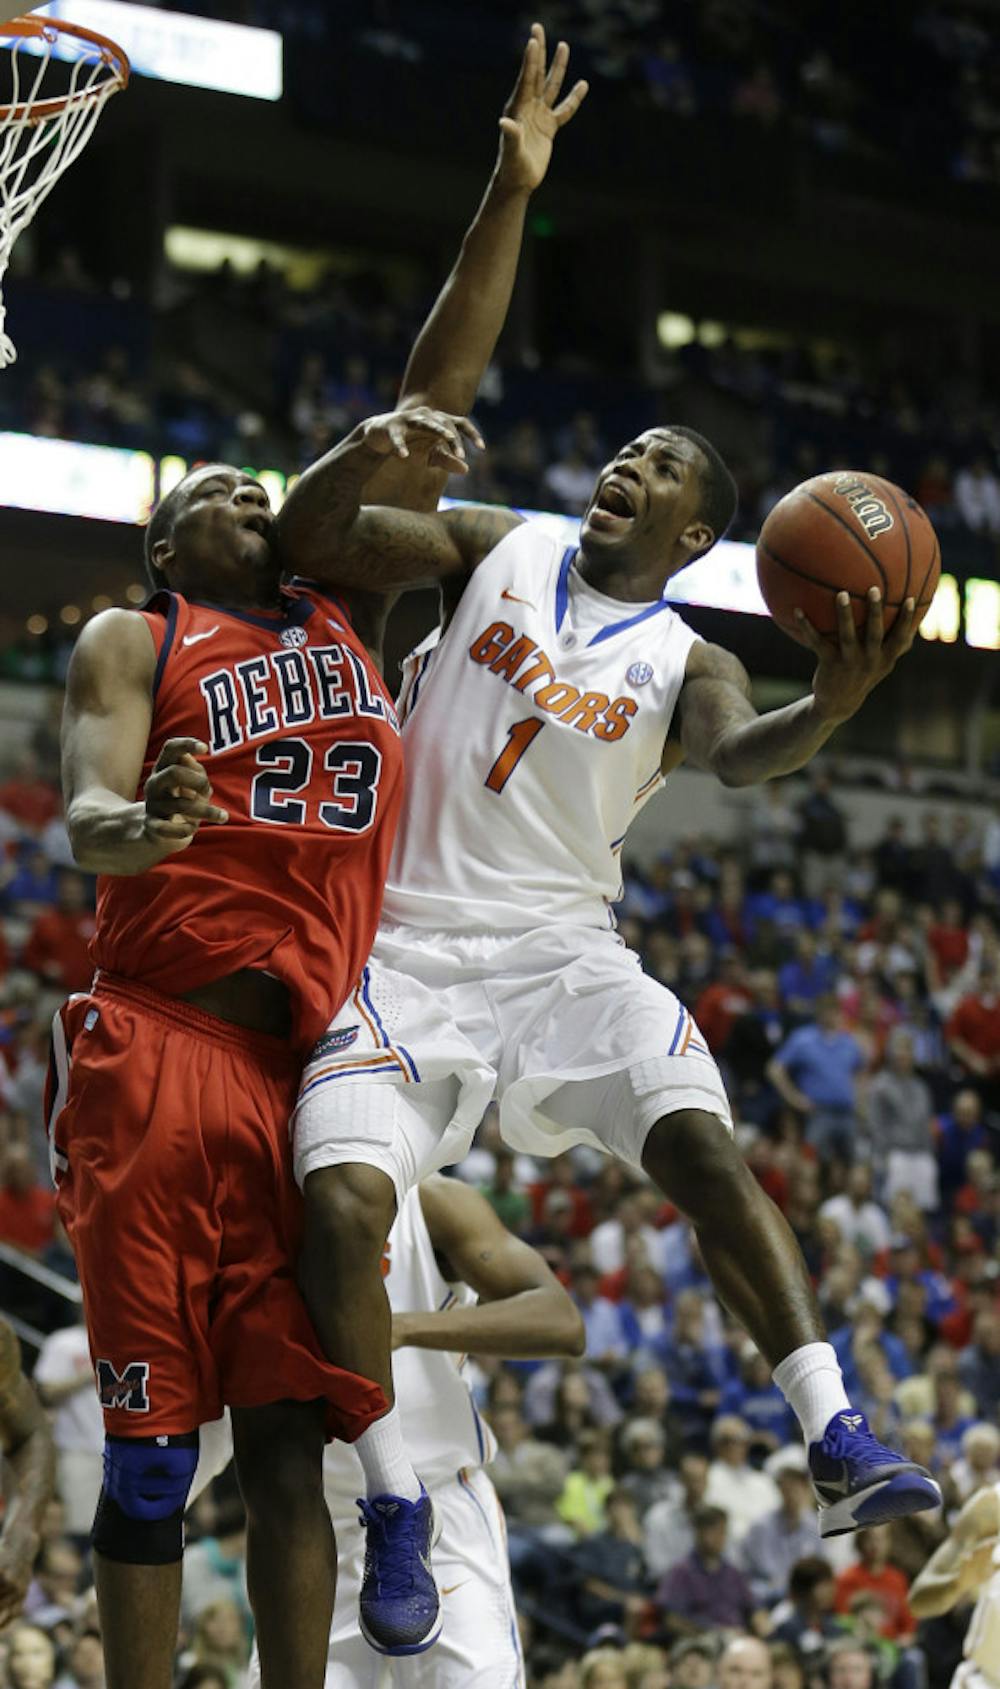 <p class="p1">Senior guard Kenny Boynton (1) takes it to the basket during Florida’s 66-63 loss to Ole Miss in the SEC Tournament final on March 17 at Bridgestone Arena in Nashville, Tenn. Boynton and the Gators have lost in the Elite Eight each of the last two years.</p>